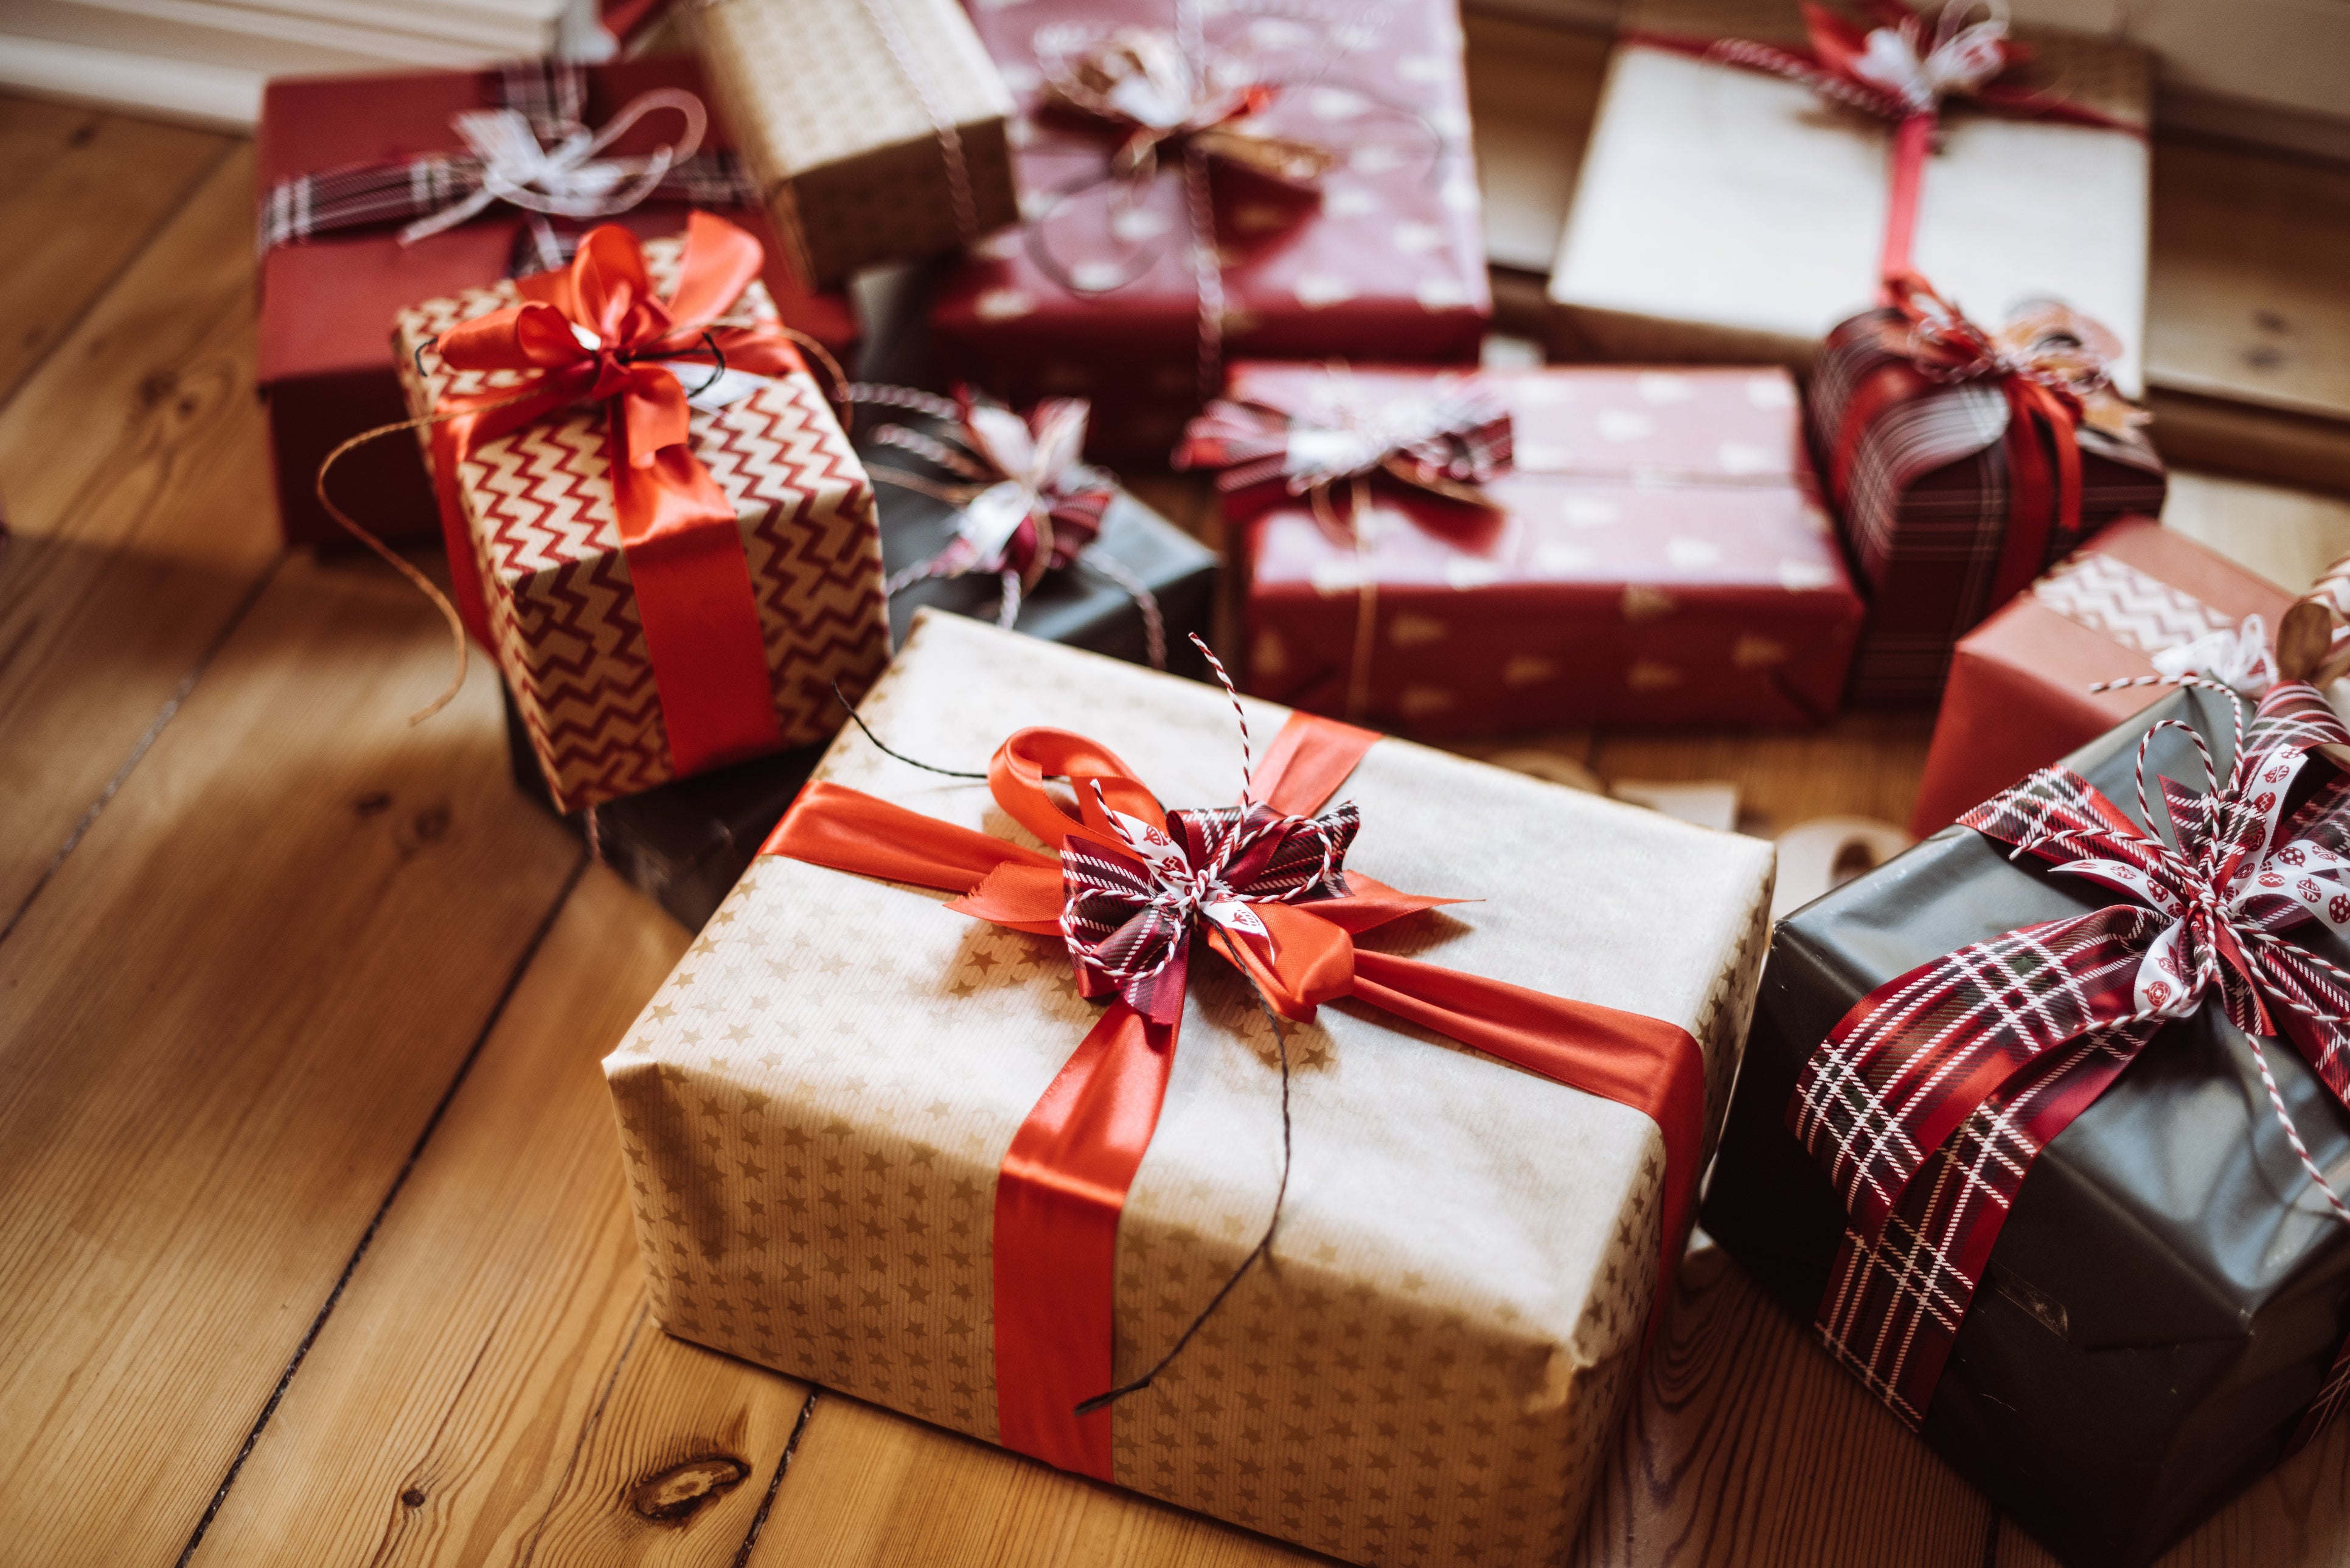 Wrapping Christmas Presents: 10 Ideas To Take Your Presents to the